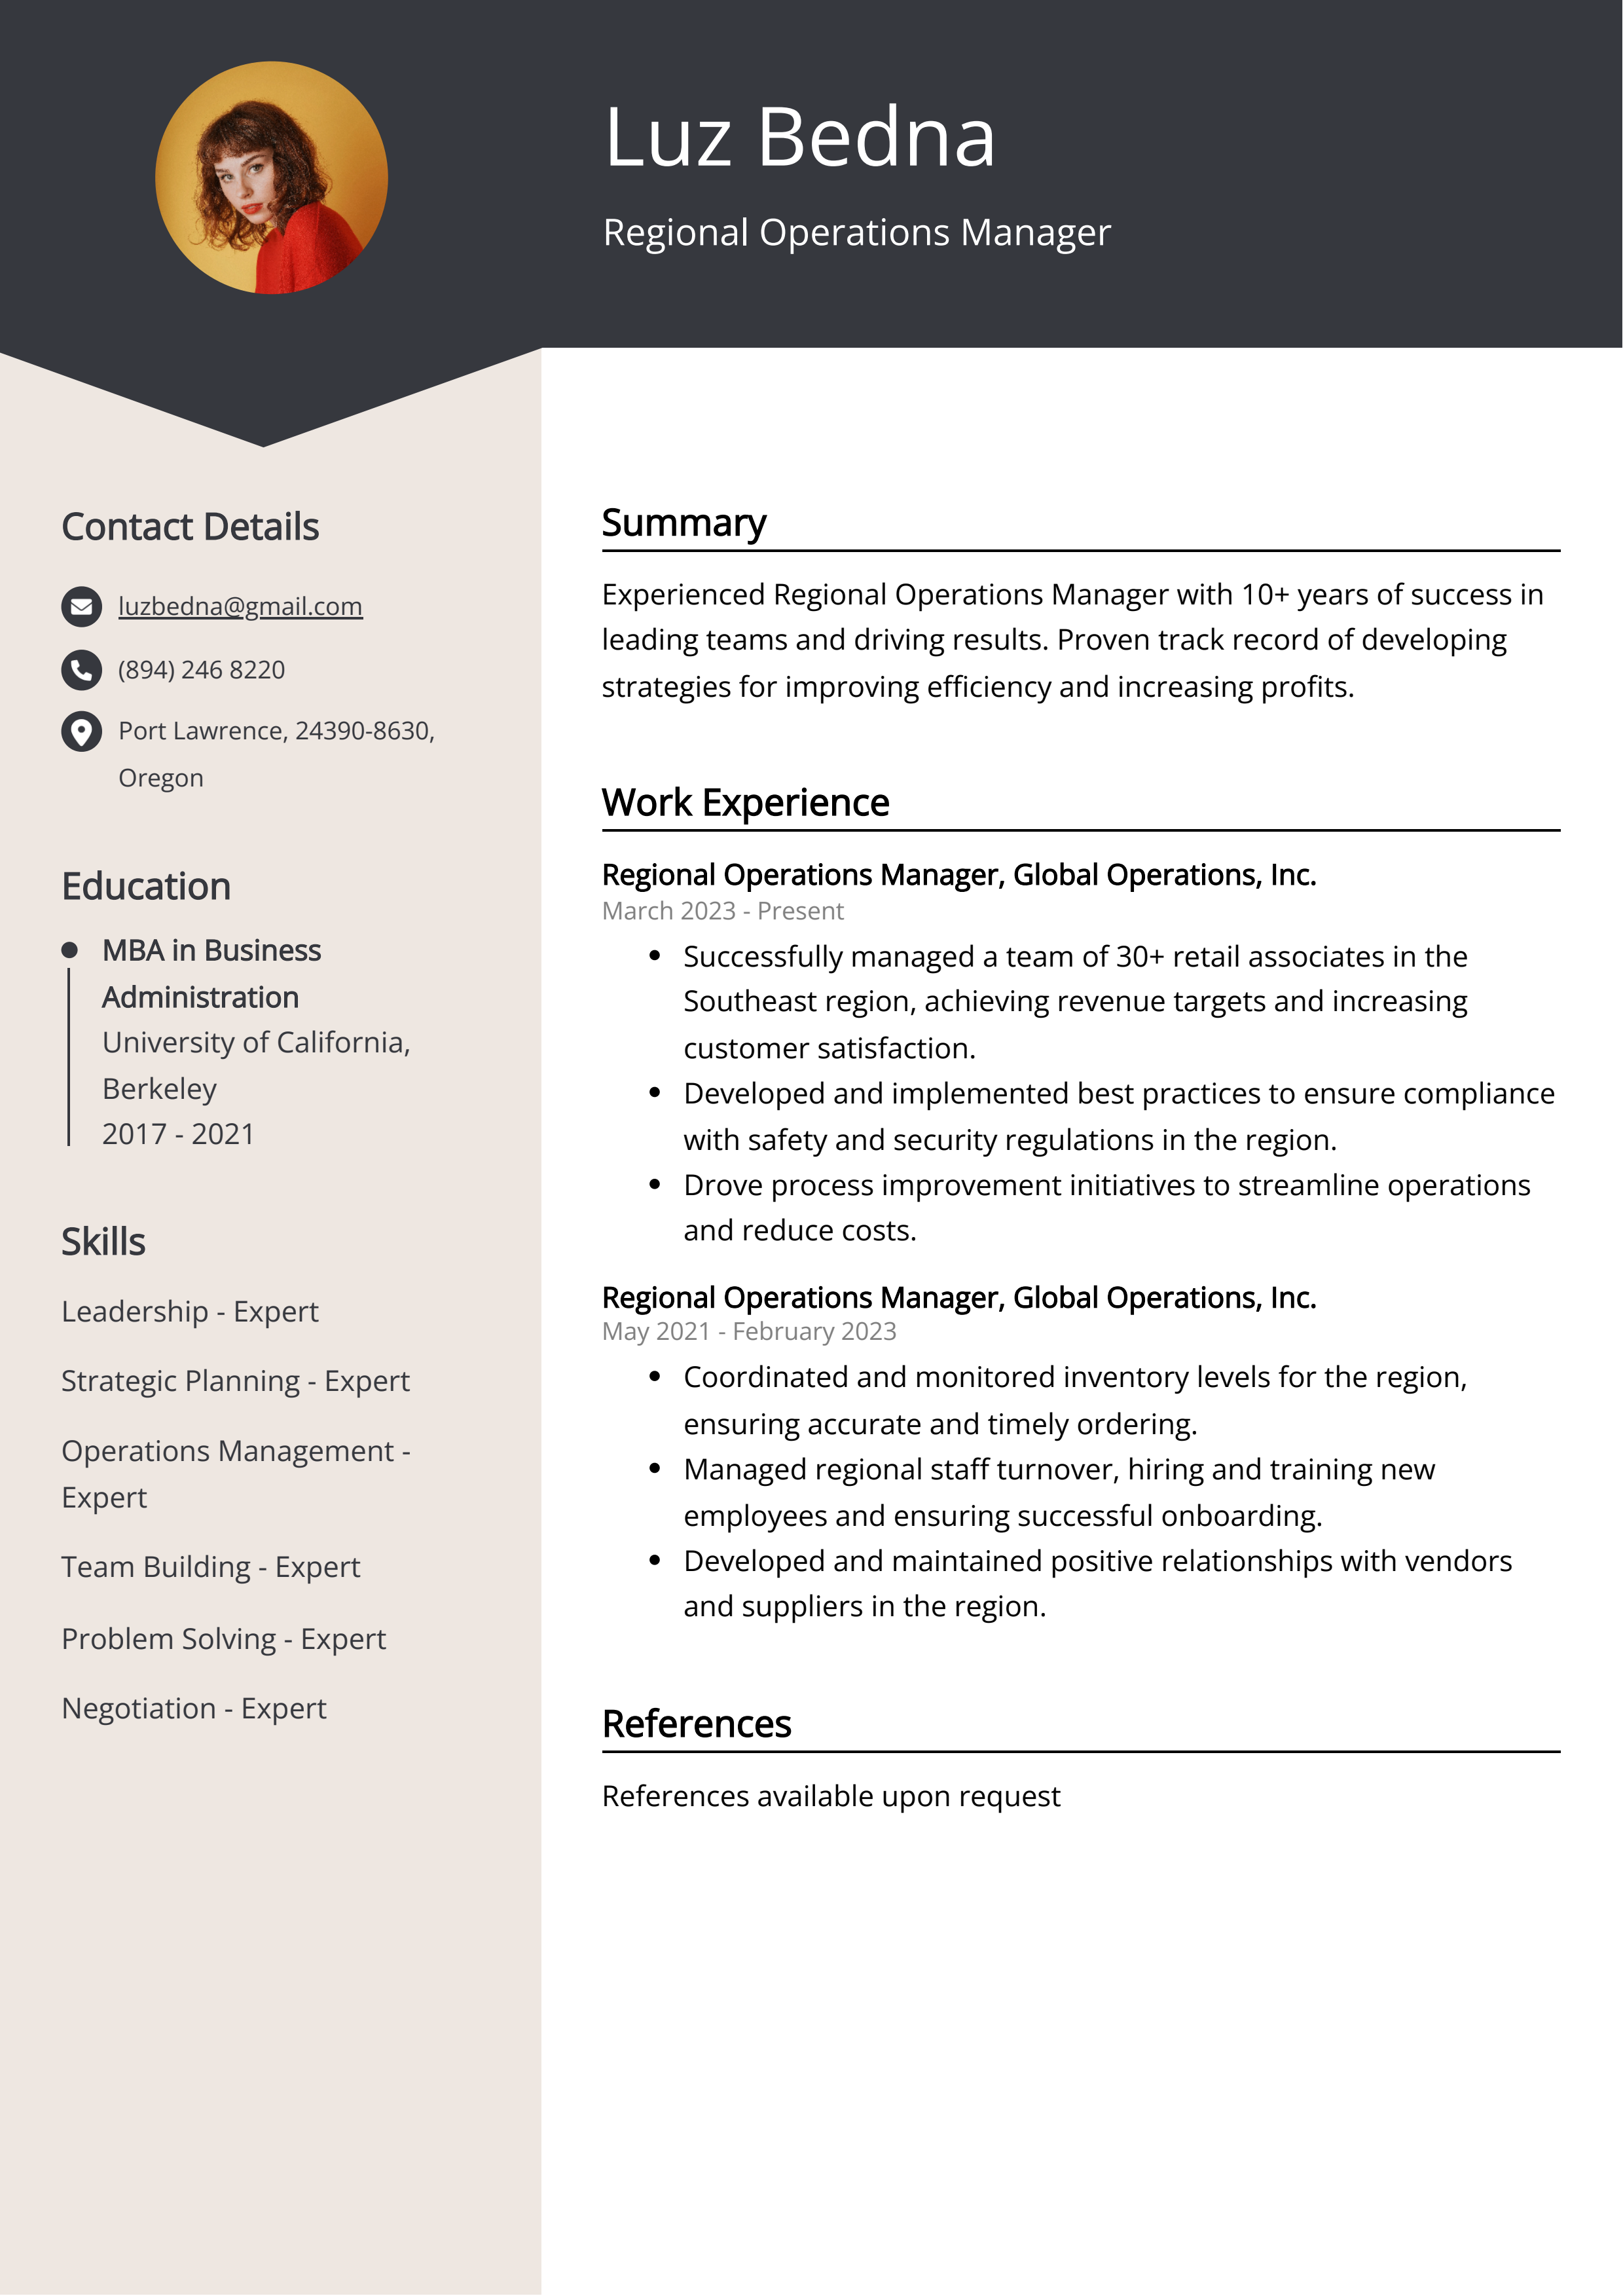 Regional Operations Manager CV Example